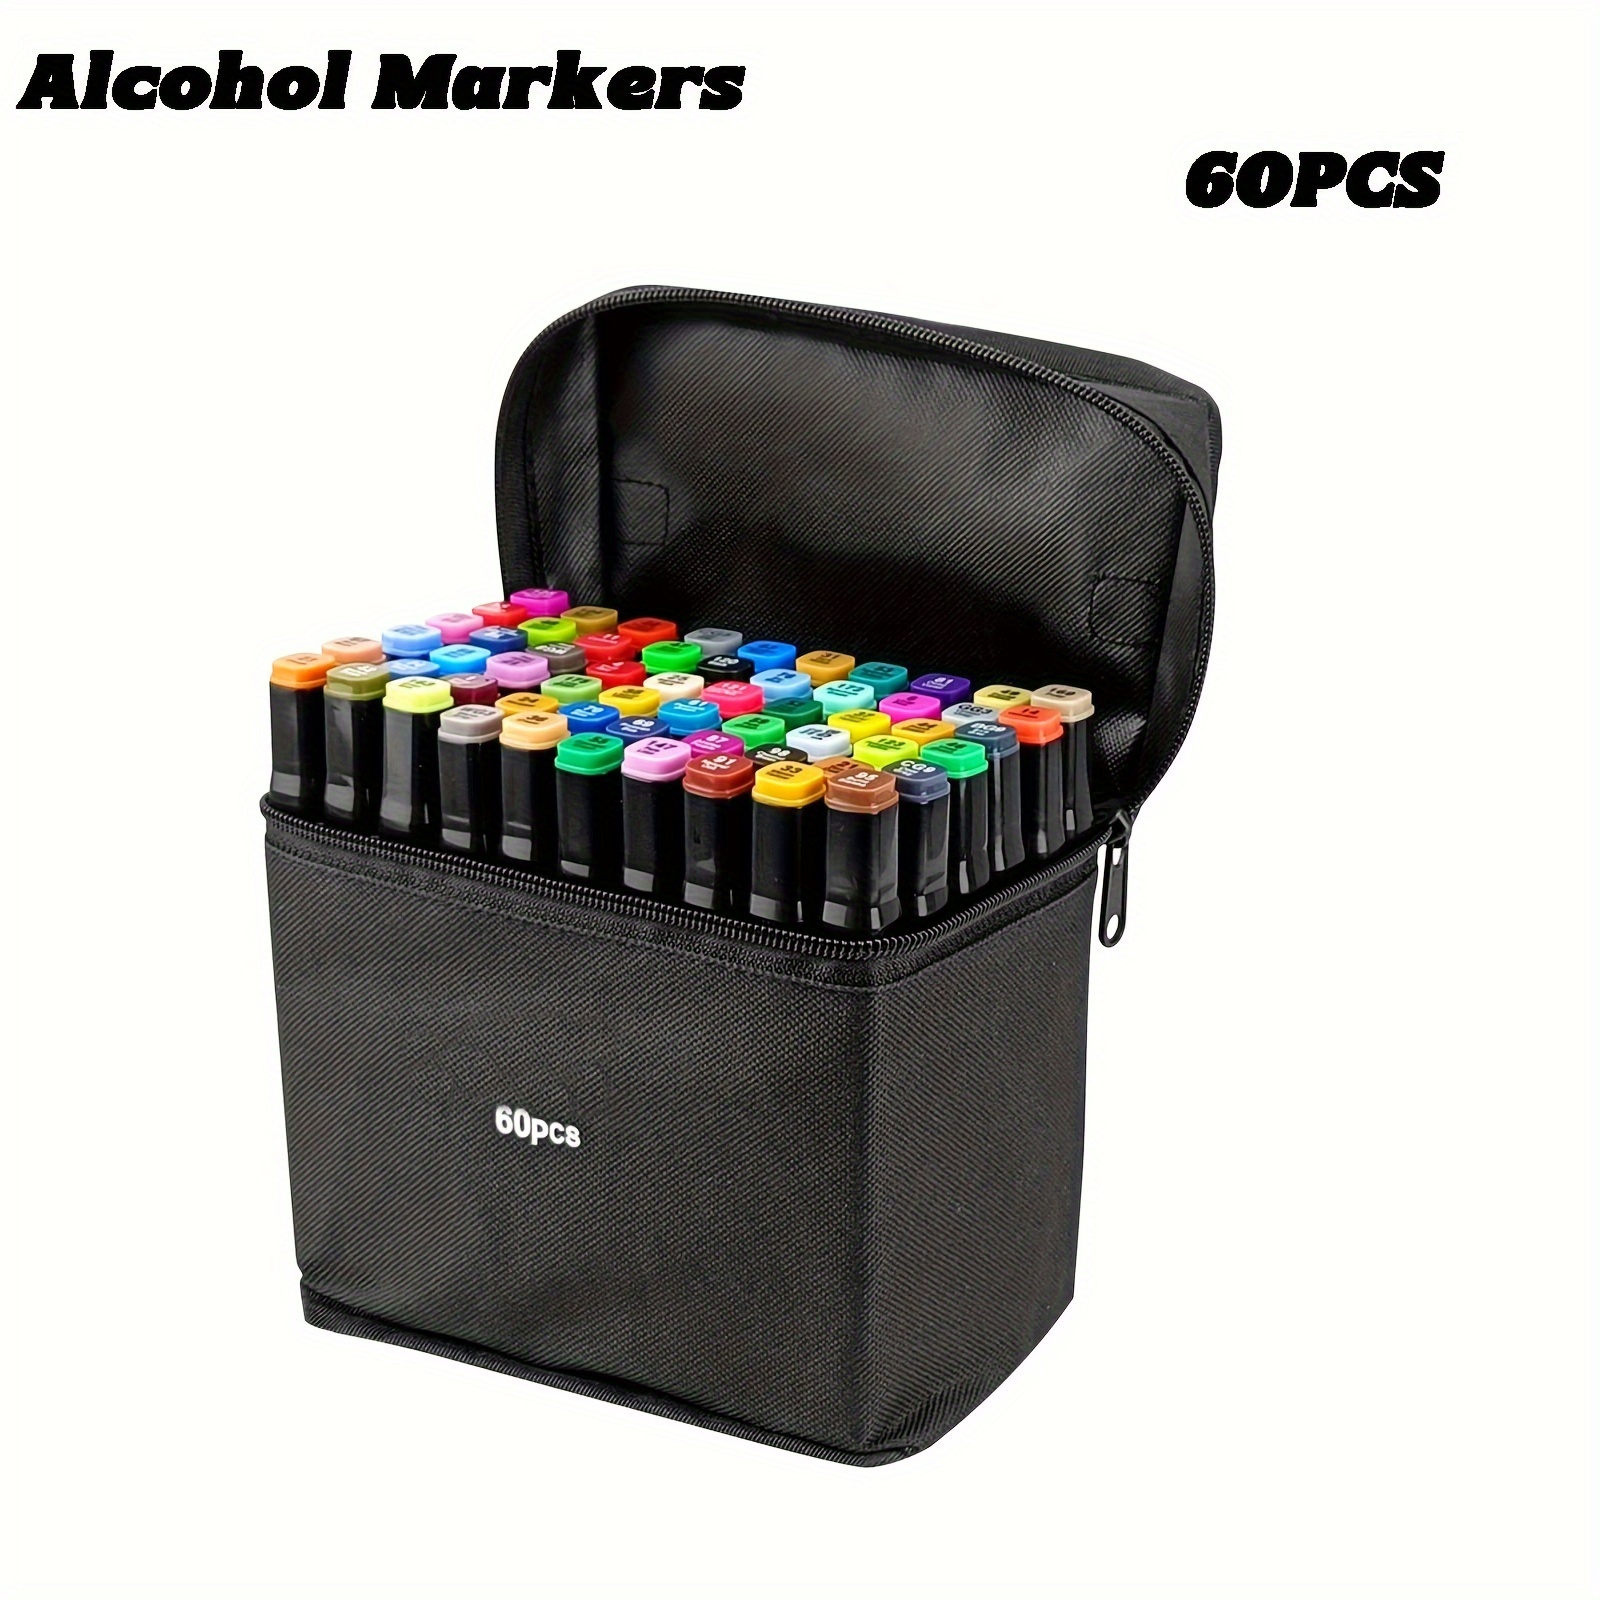 

60 Colors Alcohol For Marker Set, Dual Tip Stirring Art For Markers, Painting Coloring Permanent Sketch, Illustration Alcohol Markers